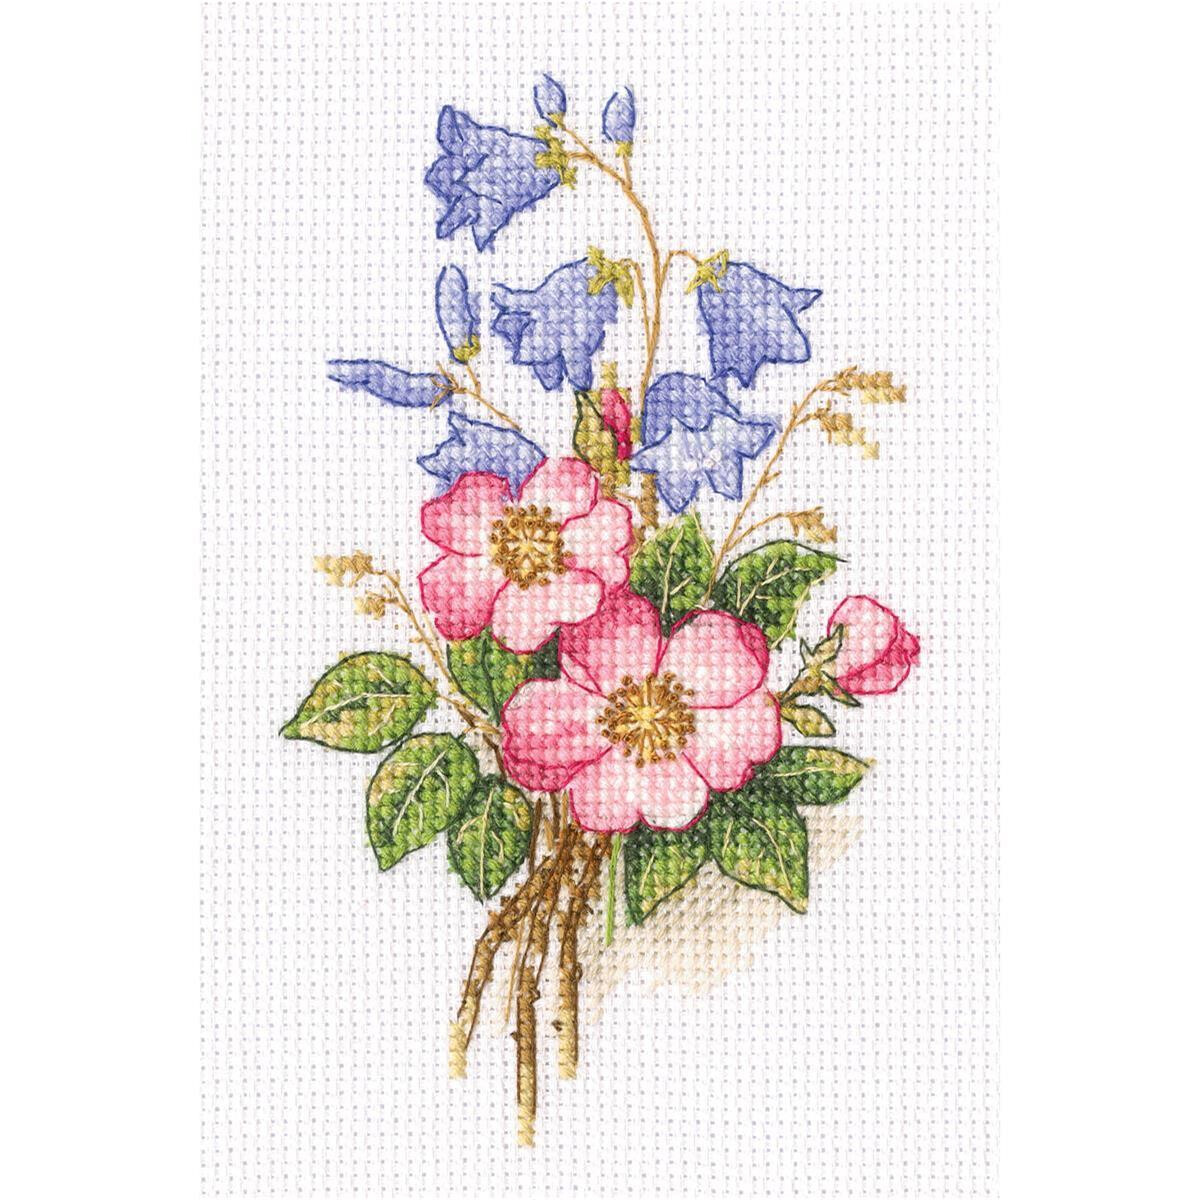 RTO counted Cross Stitch Kit "Briar and...